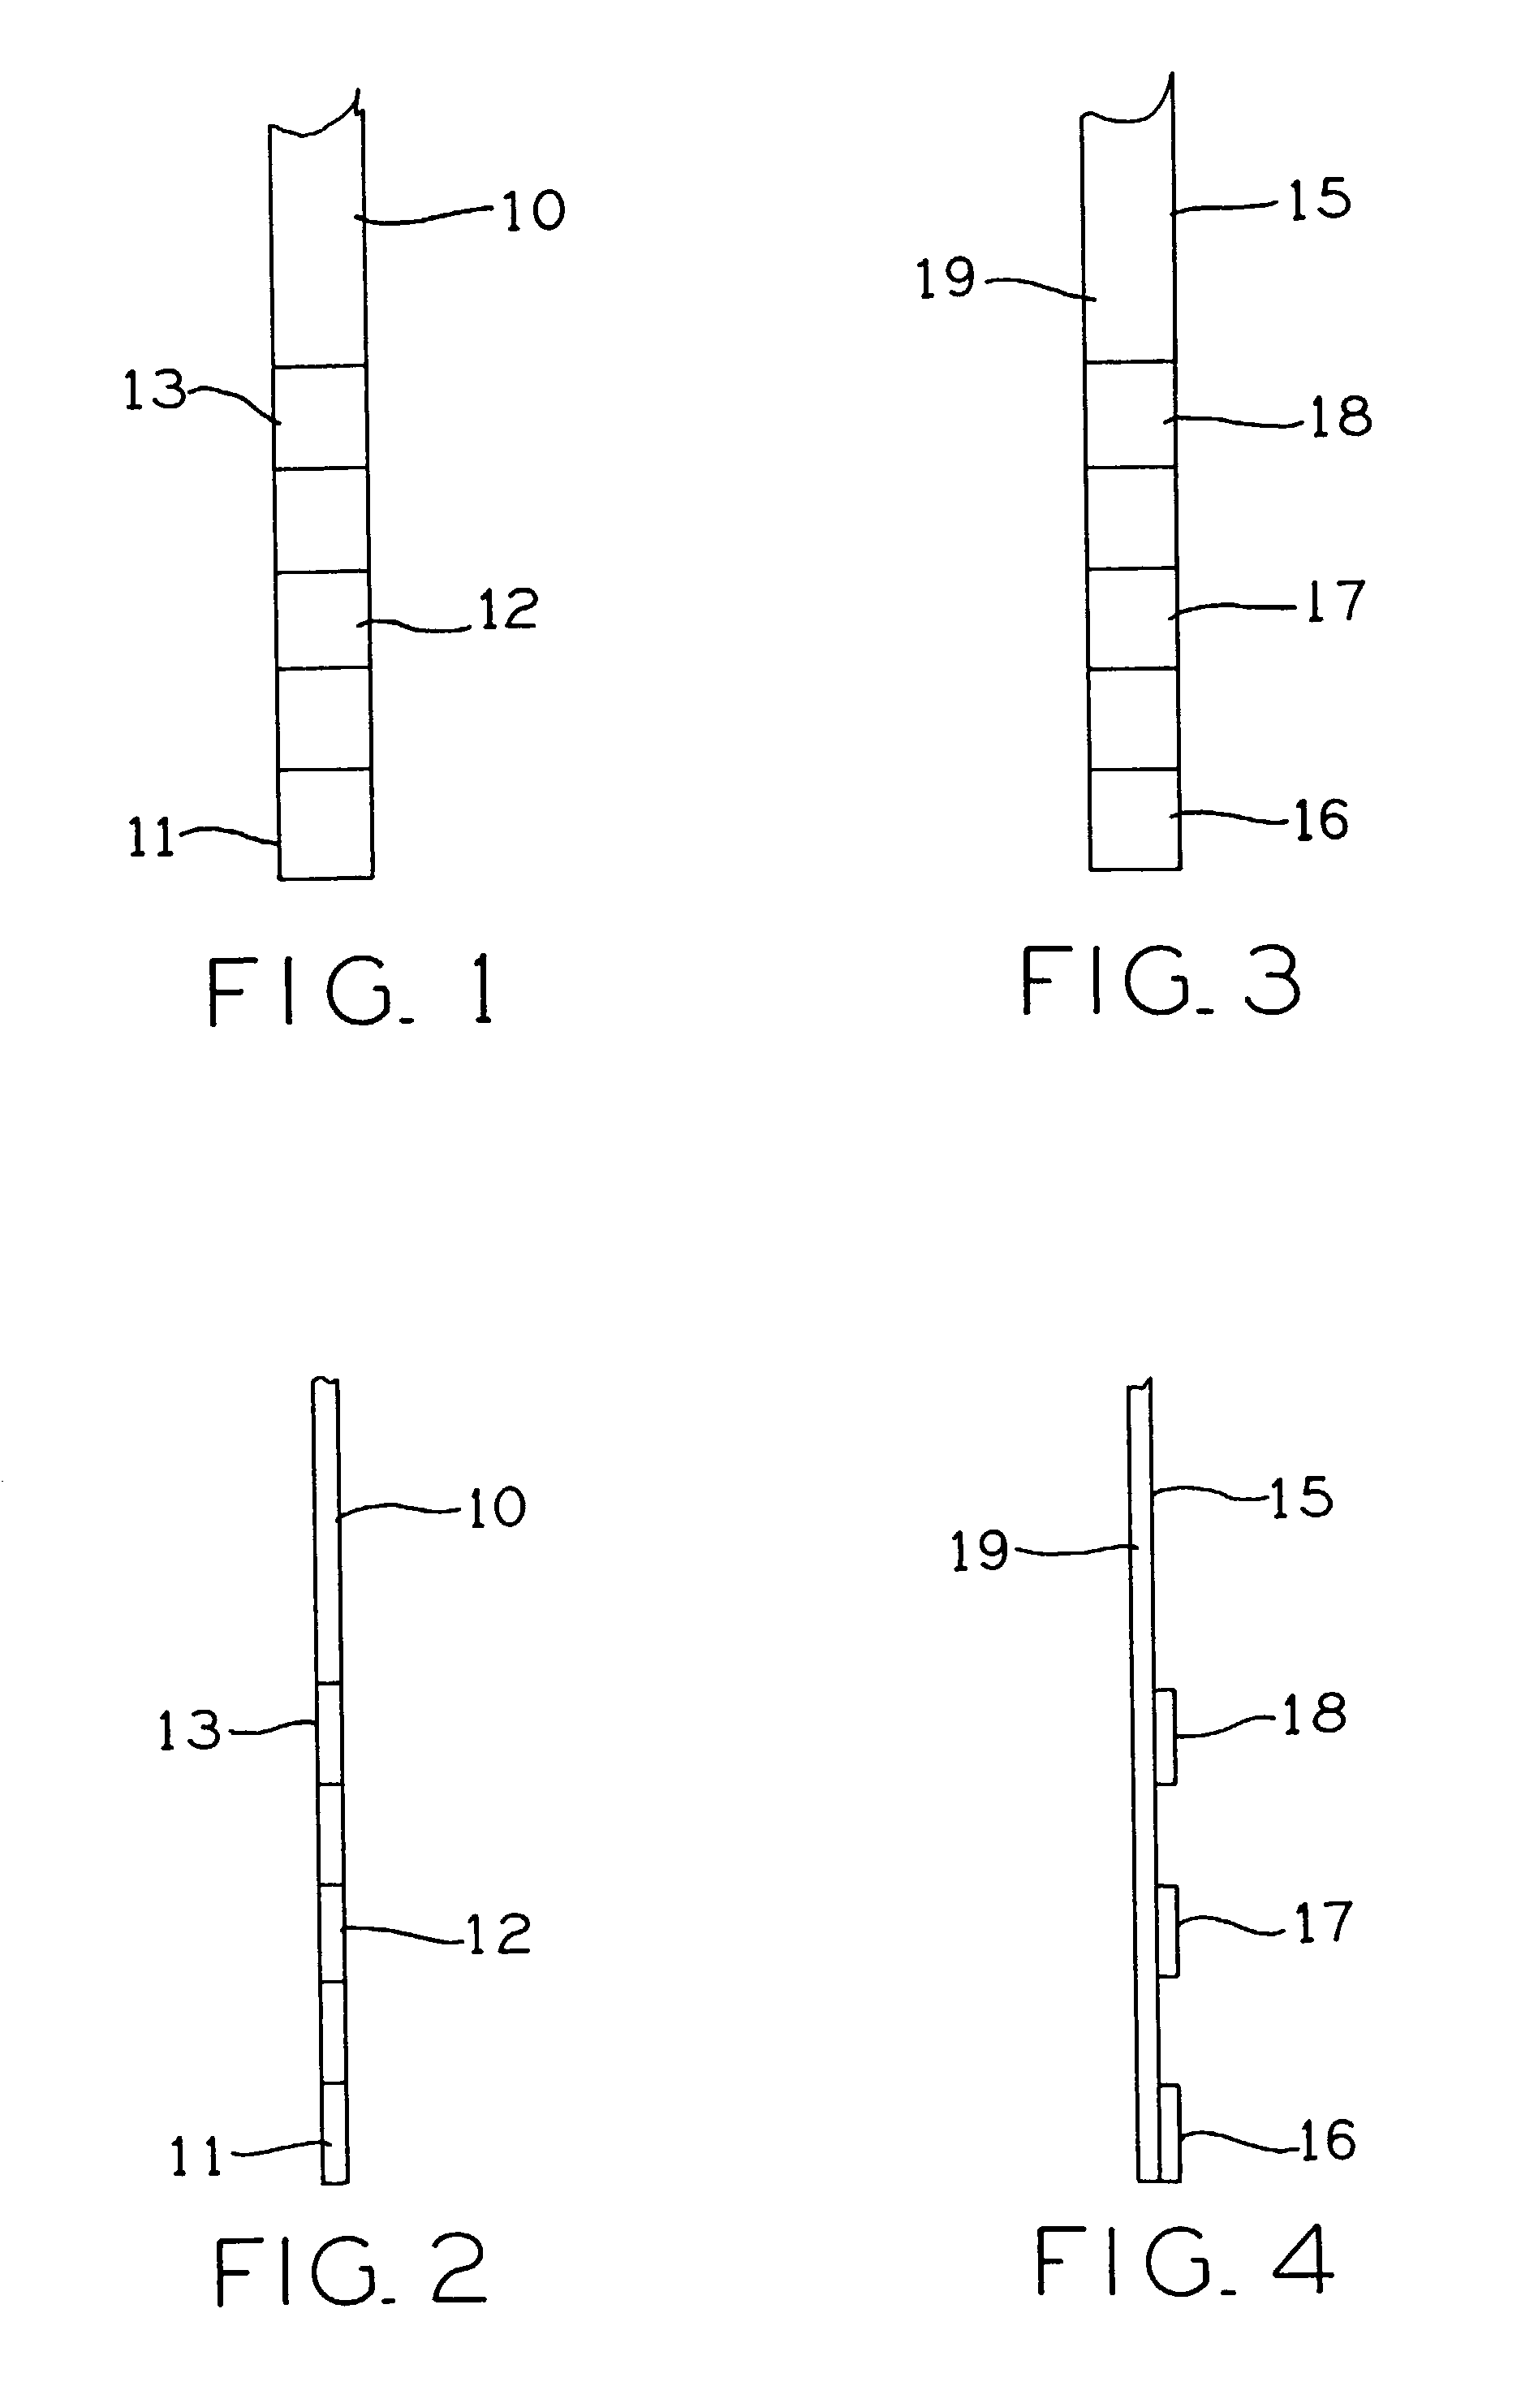 Test strip for determining dialysate composition